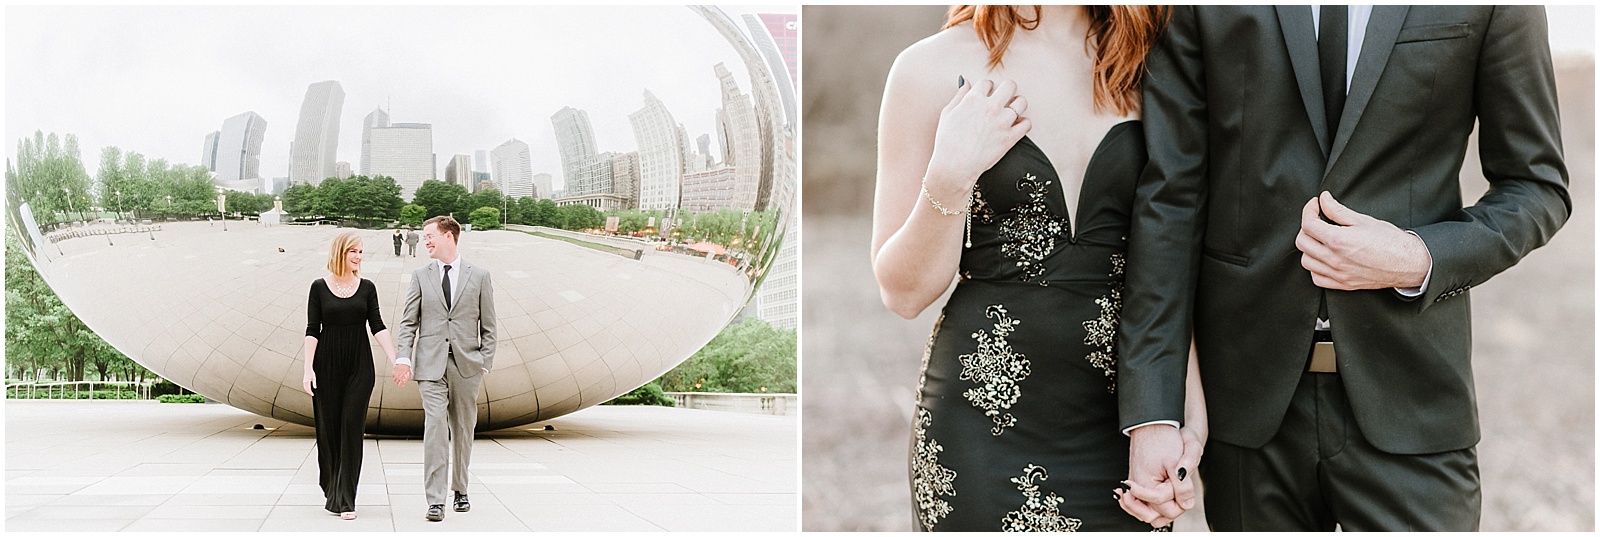 black tie engagement outfit inspiration